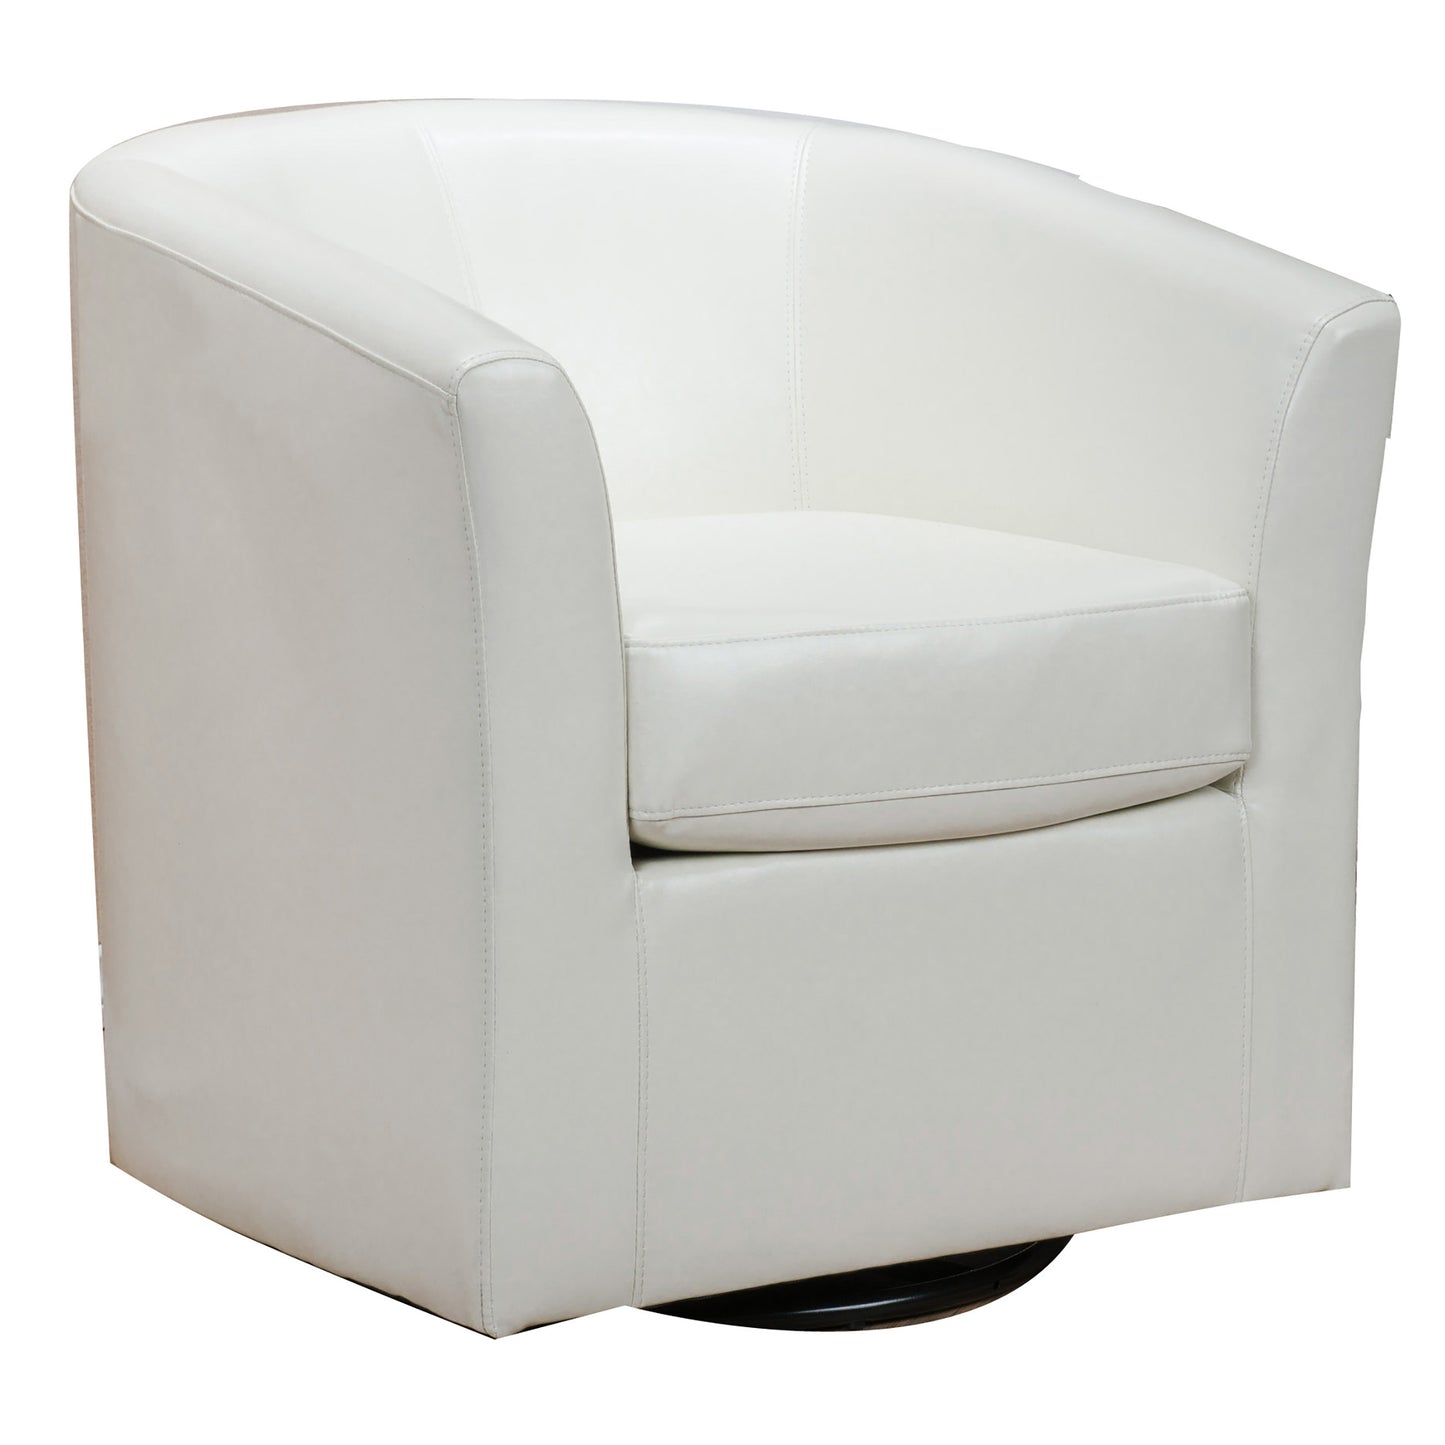 Corley Modern Upholstered Faux Leather Swivel Barrel Club Chair